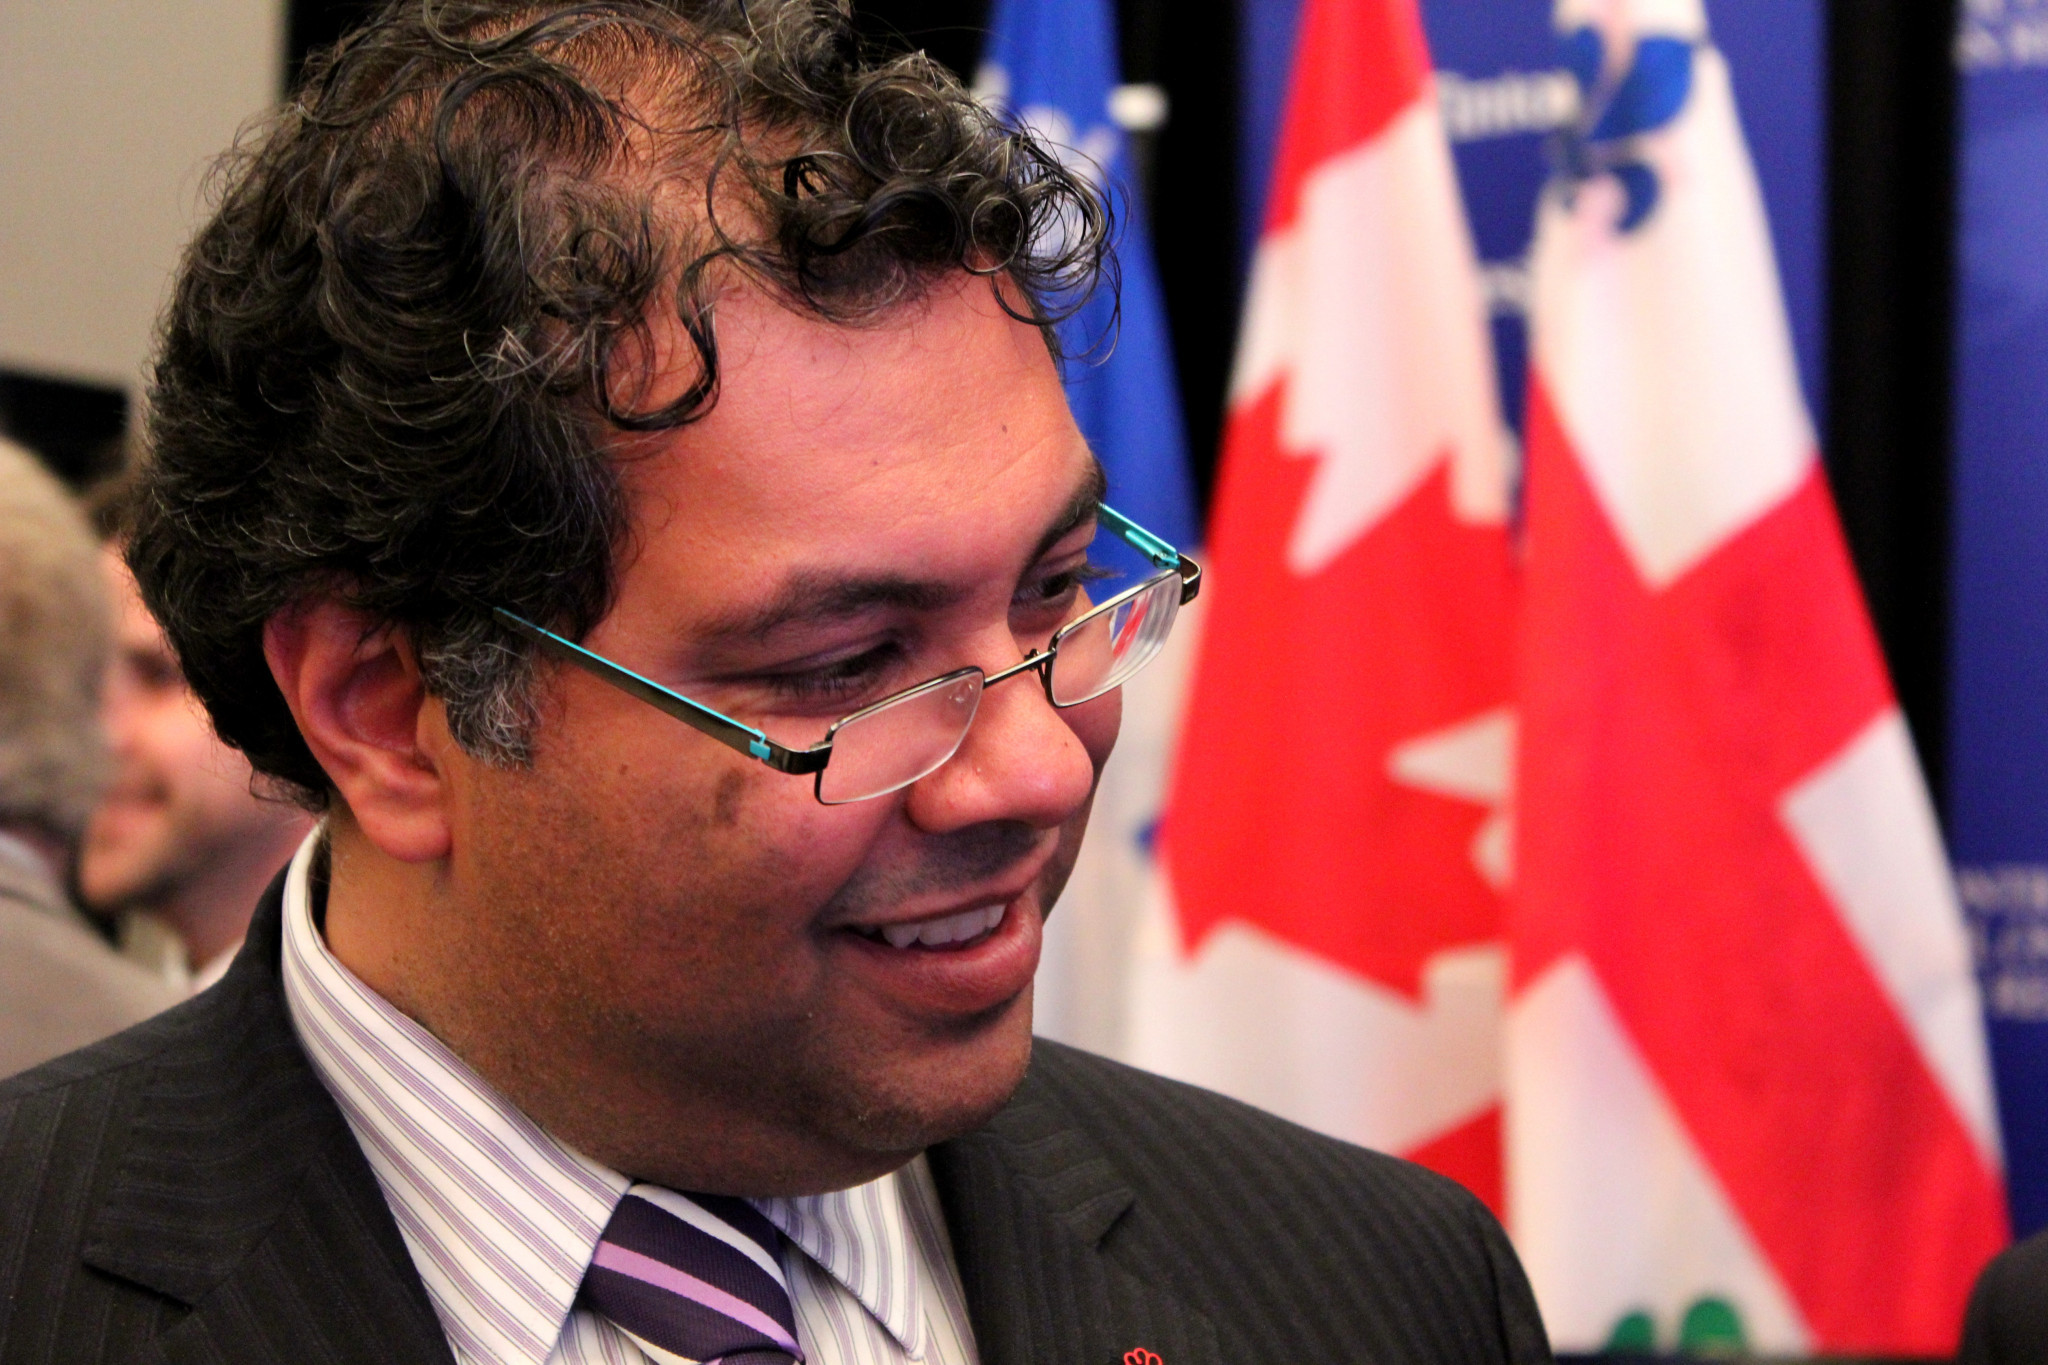 Naheed Nenshi remains a supporter of continuing the Calgary bid ©Getty Images